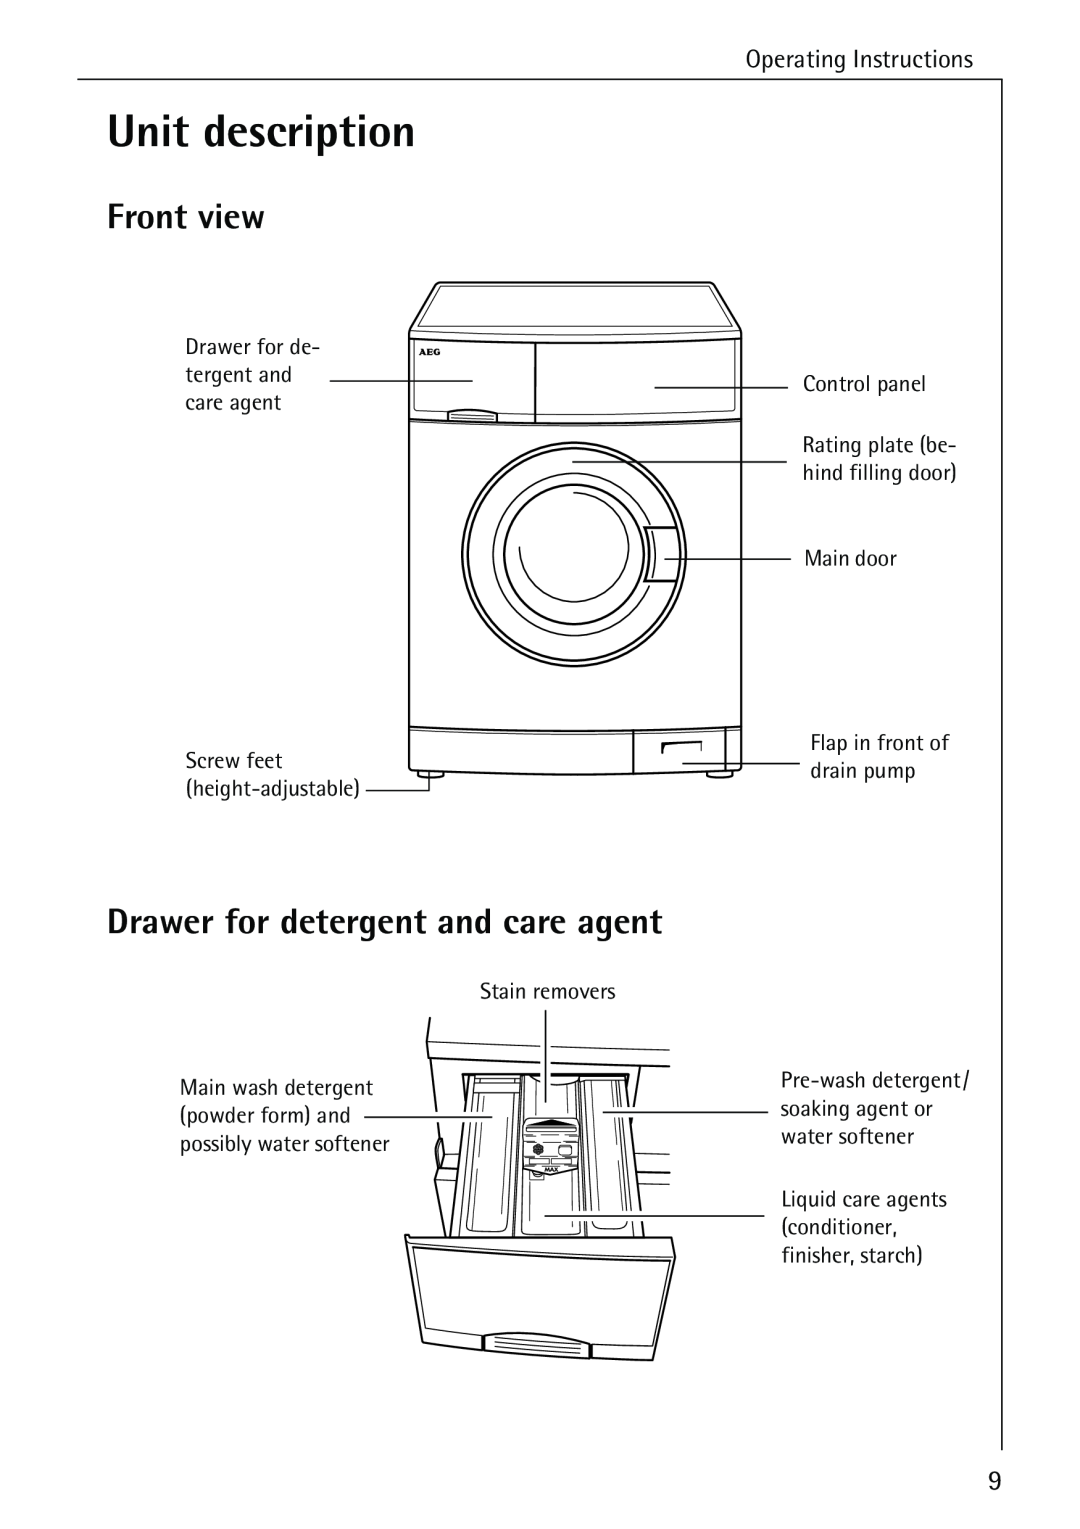 AEG 72640 manual Unit description, Front view, Drawer for detergent and care agent, Rating plate be- hind filling door 